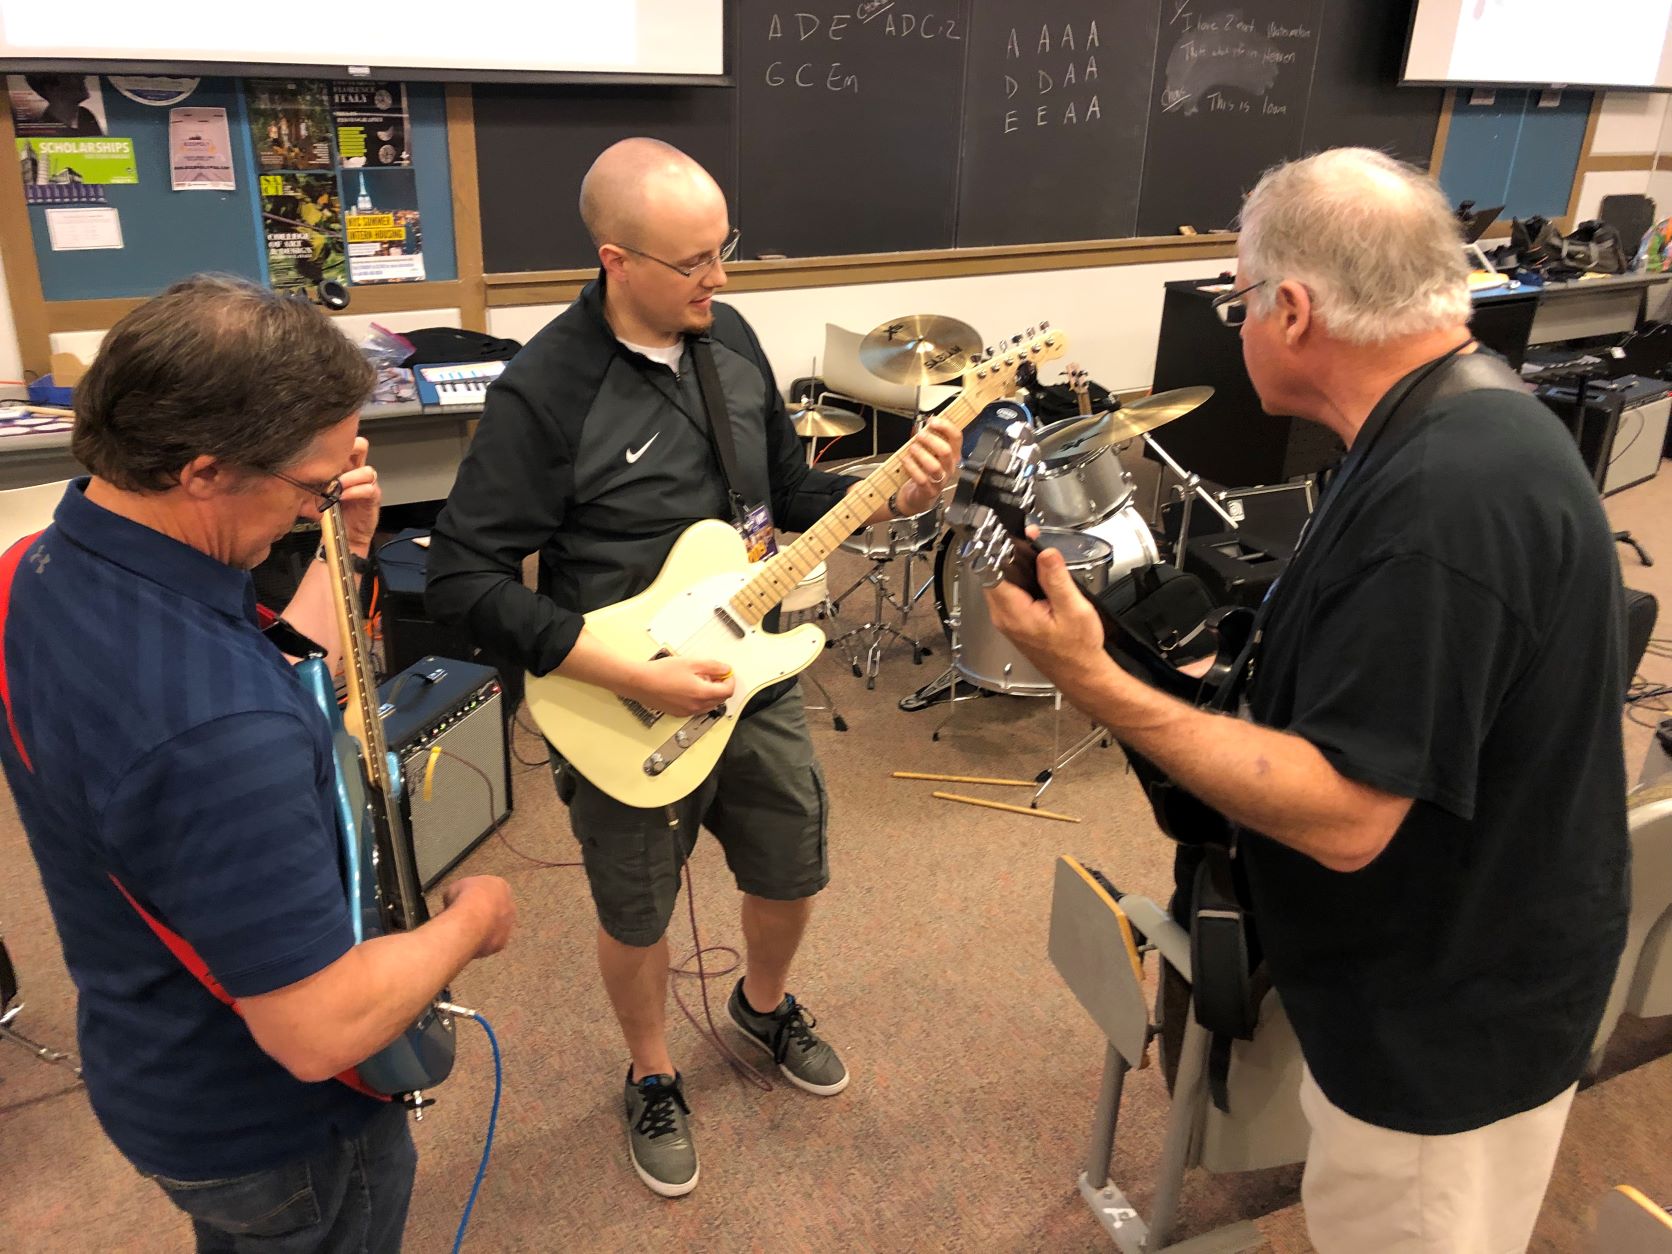 Two workshop participants working with the instructor learning how to play electric guitar